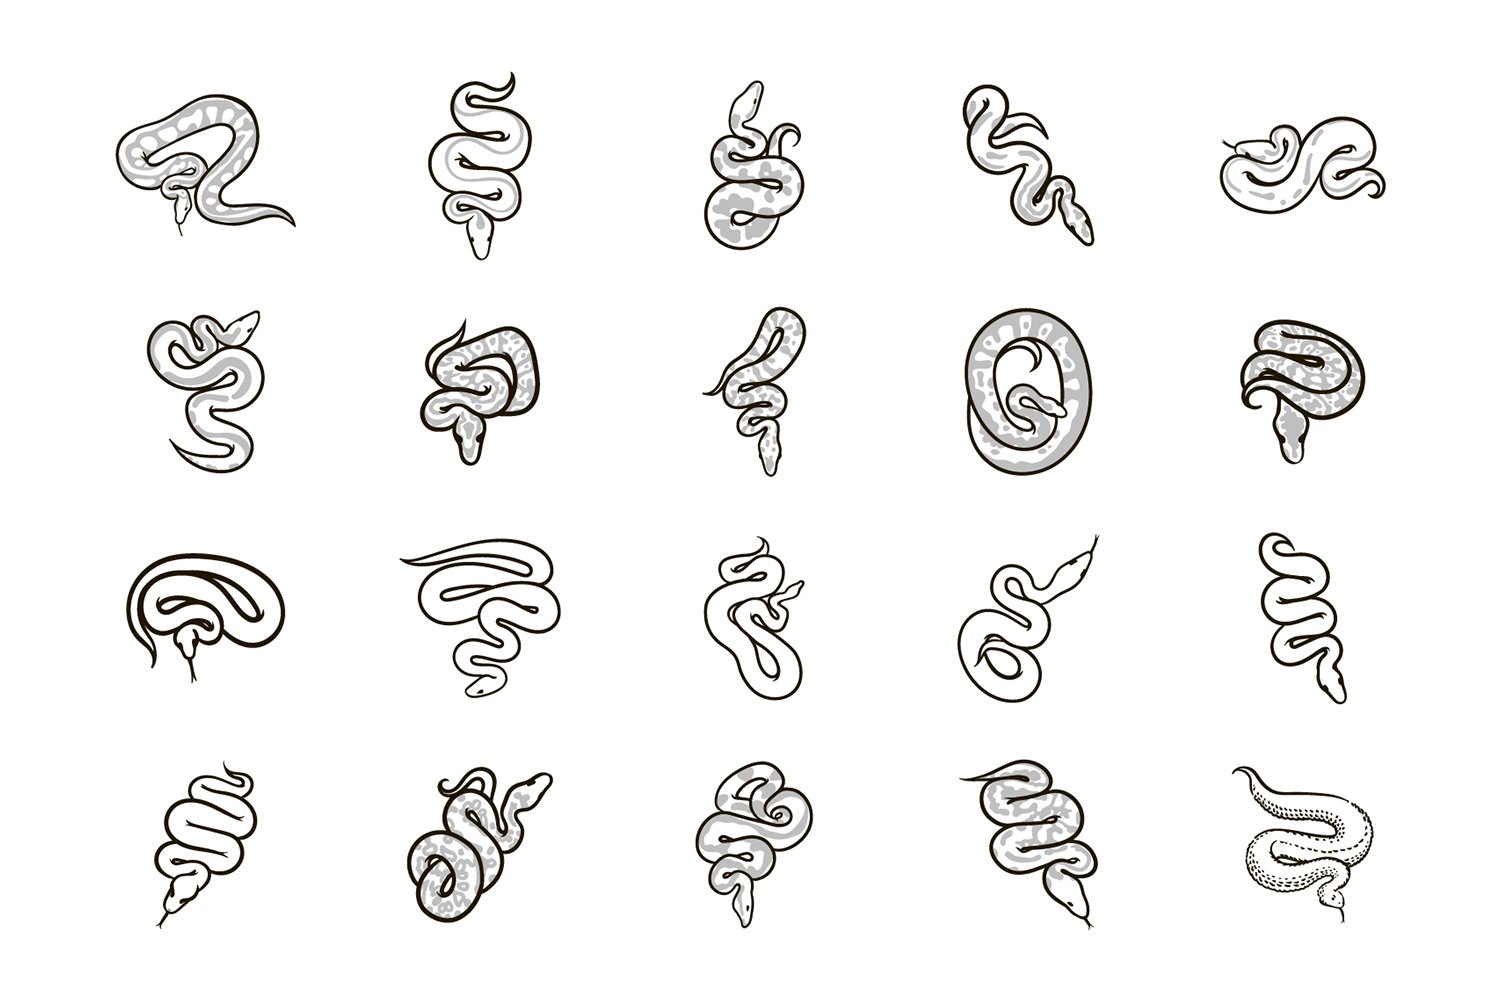 Set of hand-drawn images of wild snakes.